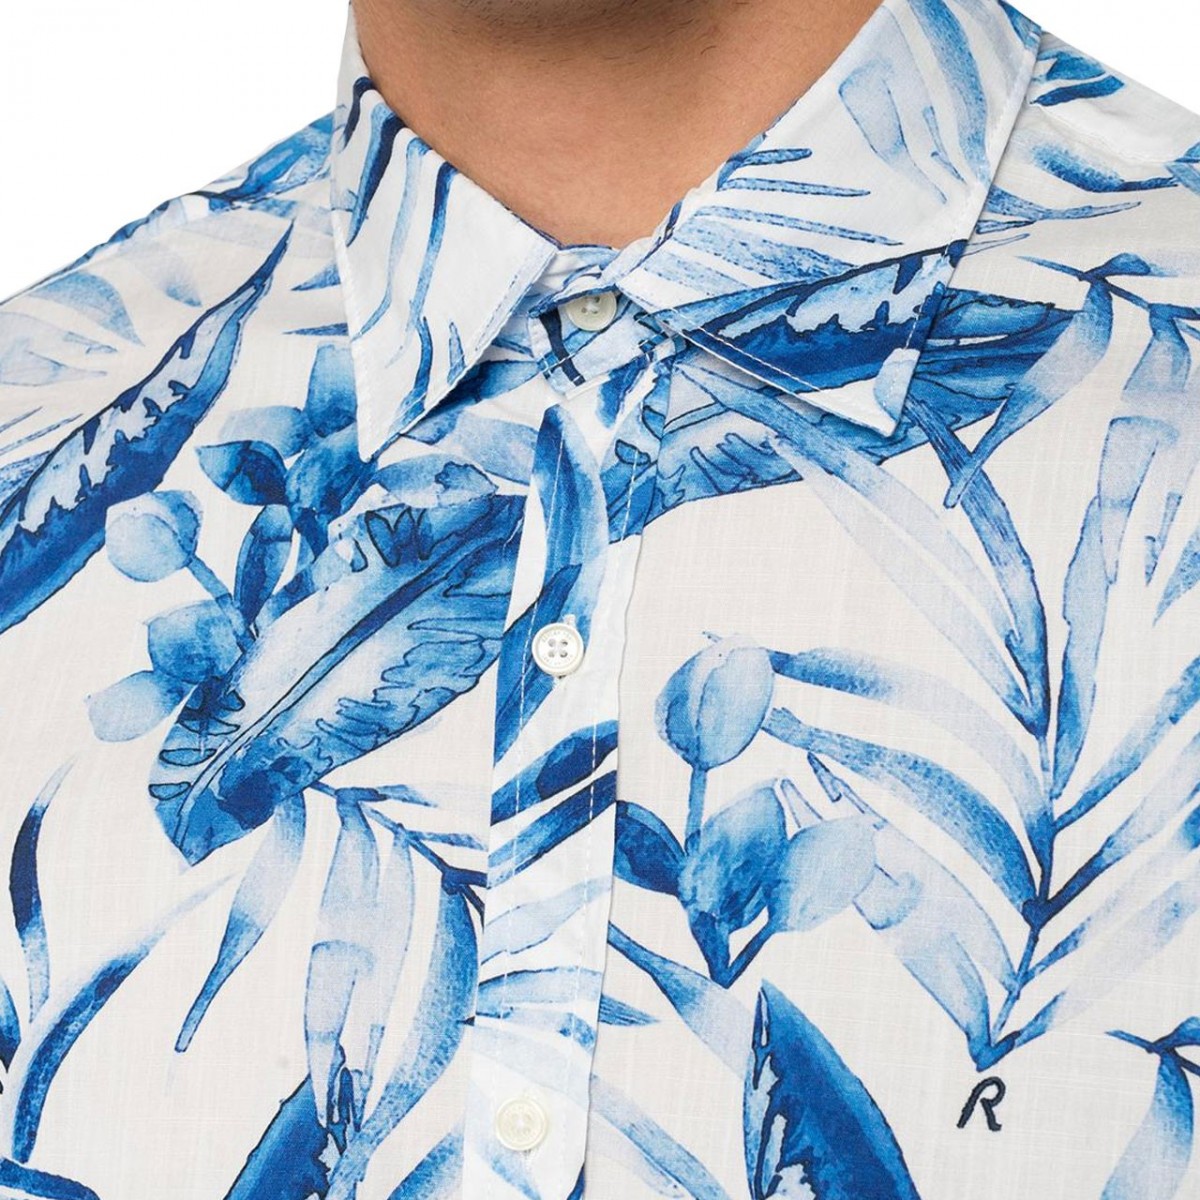 Replay | Flamed Cotton Shirt Foliage, White | RPY_M4025 .000.71974 .010